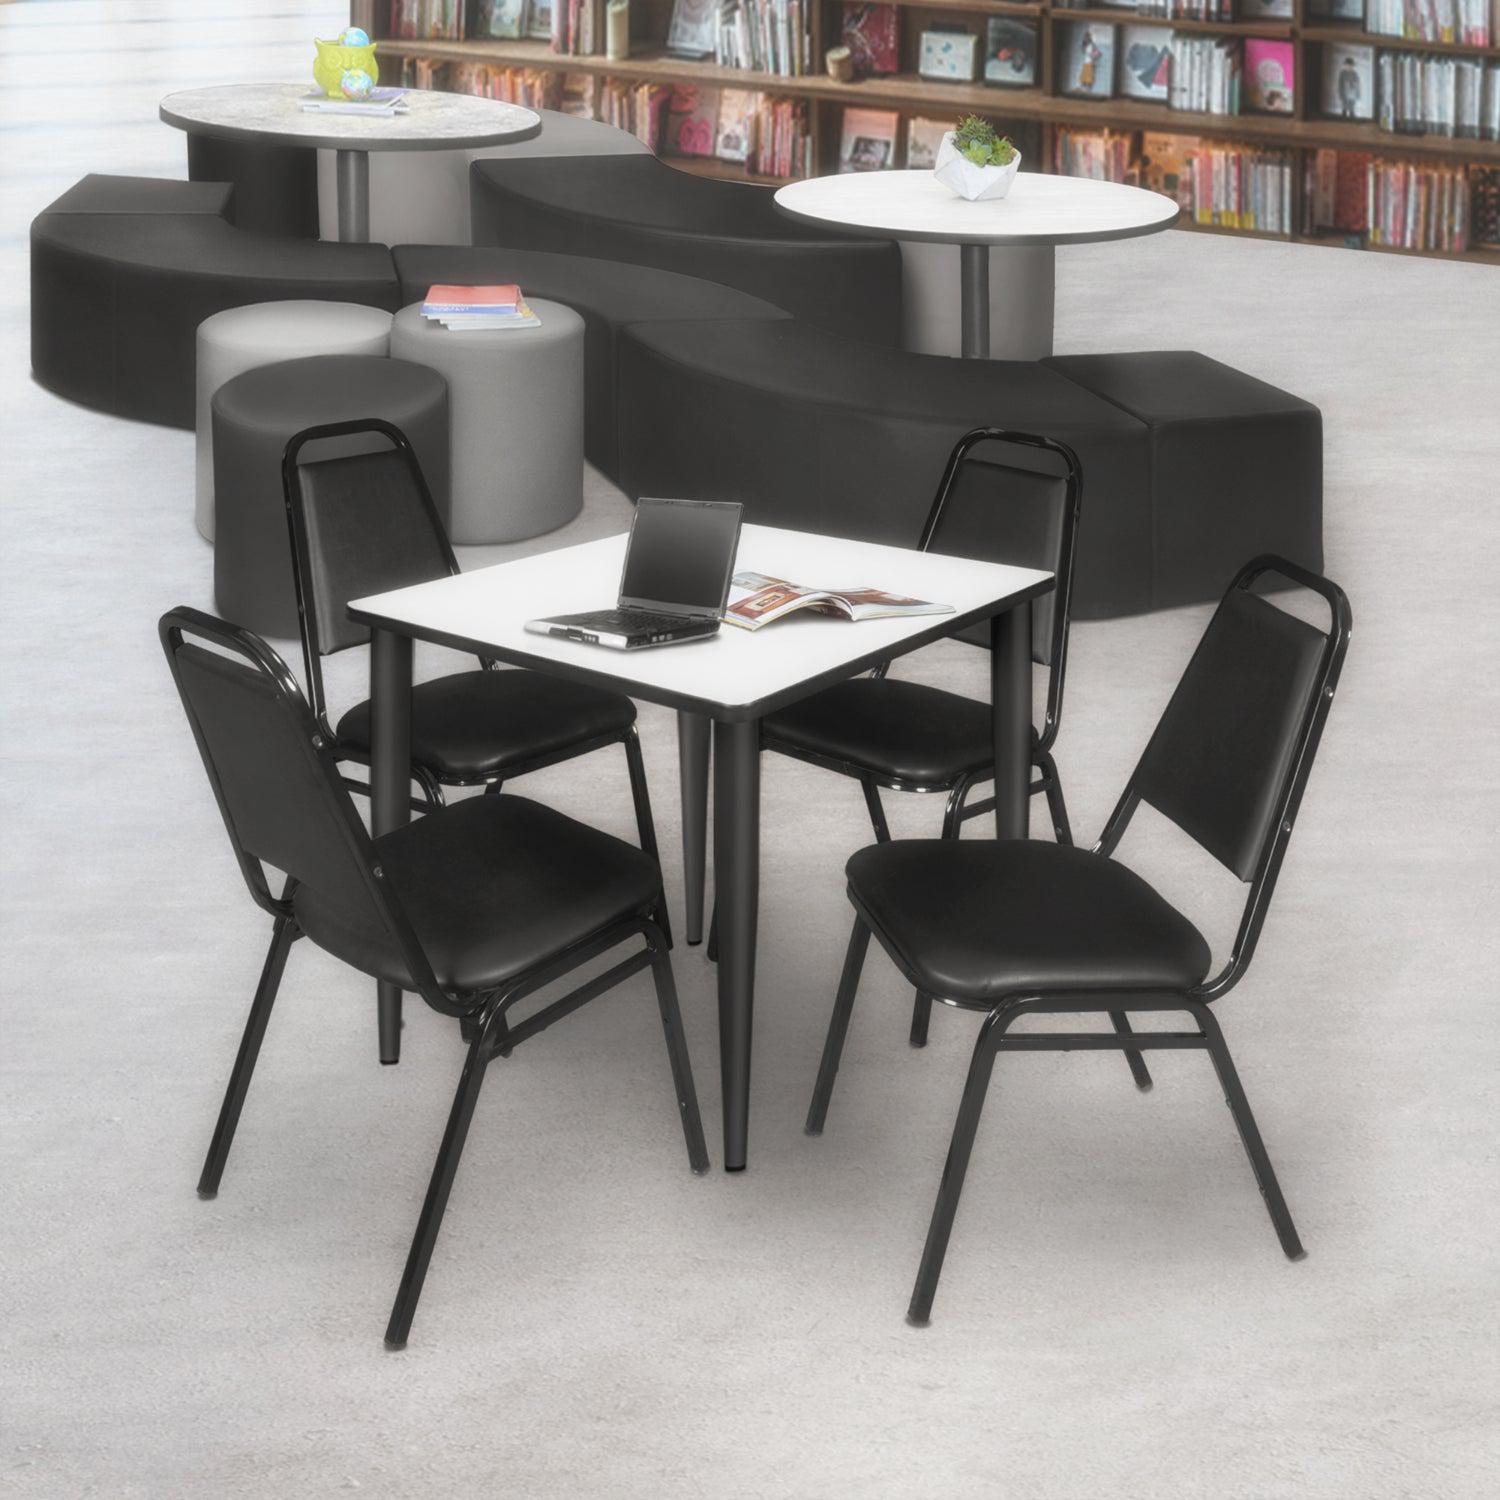 Kahlo Square Breakroom Table and Chair Package, 36" Square Kahlo Tapered Leg Breakroom Table with 4 Restaurant Stack Chairs